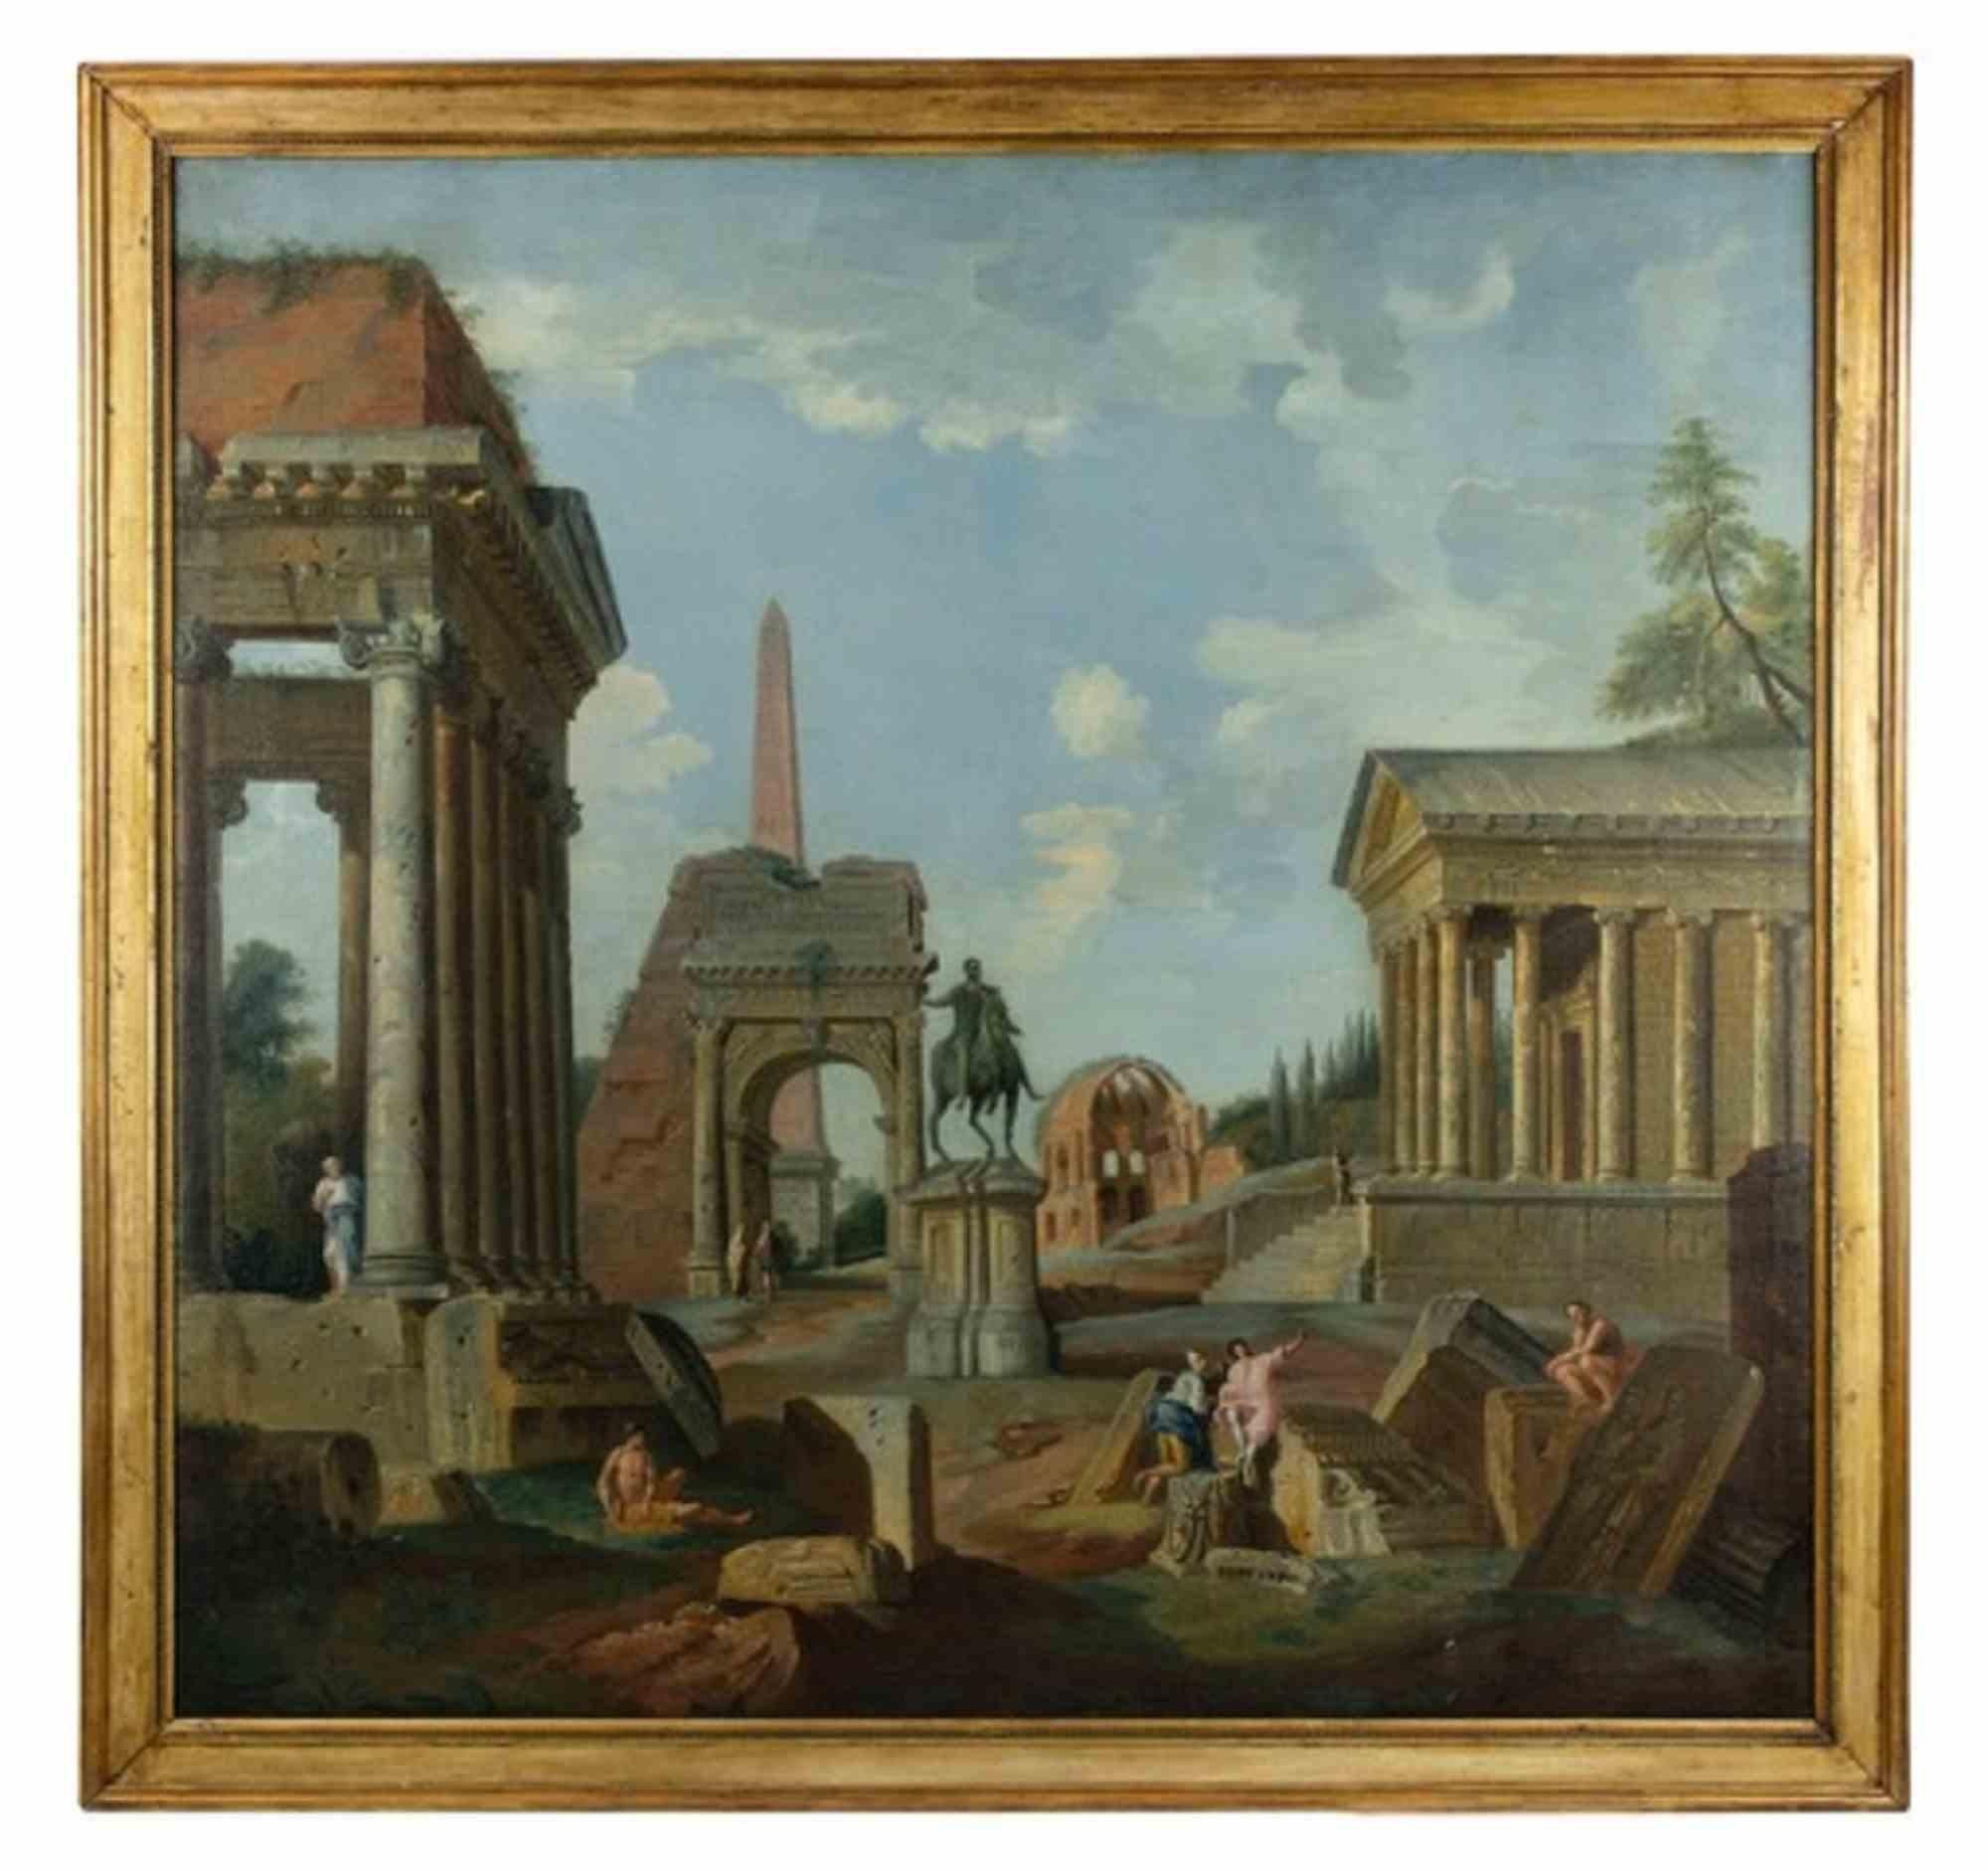 Roman ruins is an original old master artwork realized realized by a follower of the artist Giovanni Paolo Panini and attributed to Francis Harding (1730-1766).

Mixed colored oil on canvas.

Includes frame.

The work is a replica of Panini's canvas